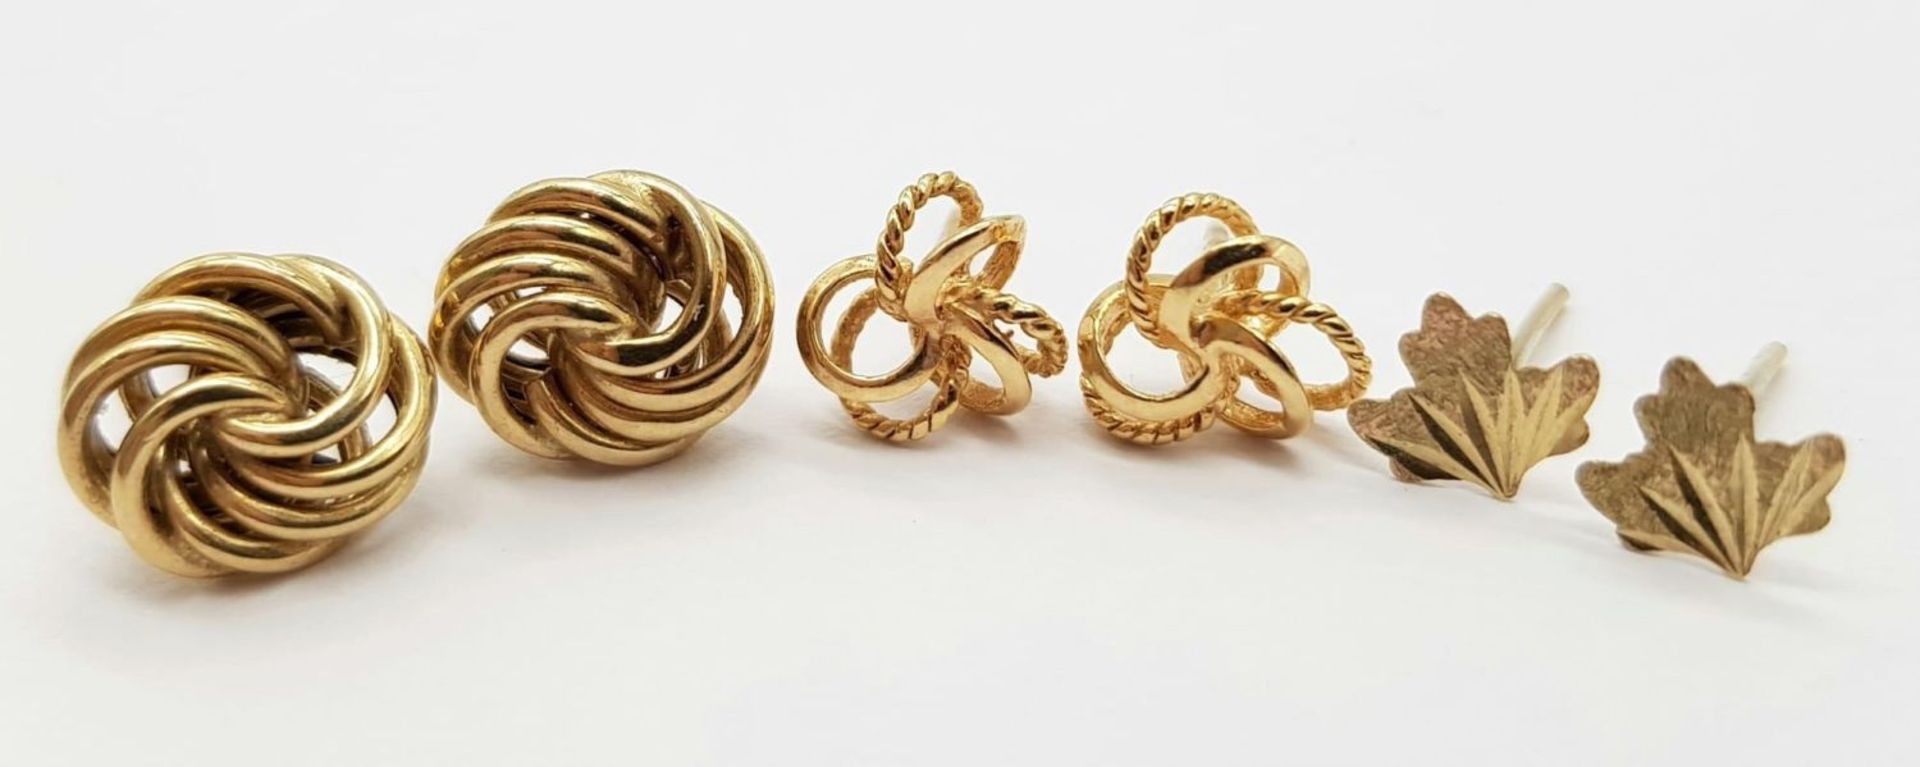 Three Pairs of 9K Yellow Gold Different Style Earrings - Knot, leaf and entwined. No backs. 1.9g - Image 2 of 5